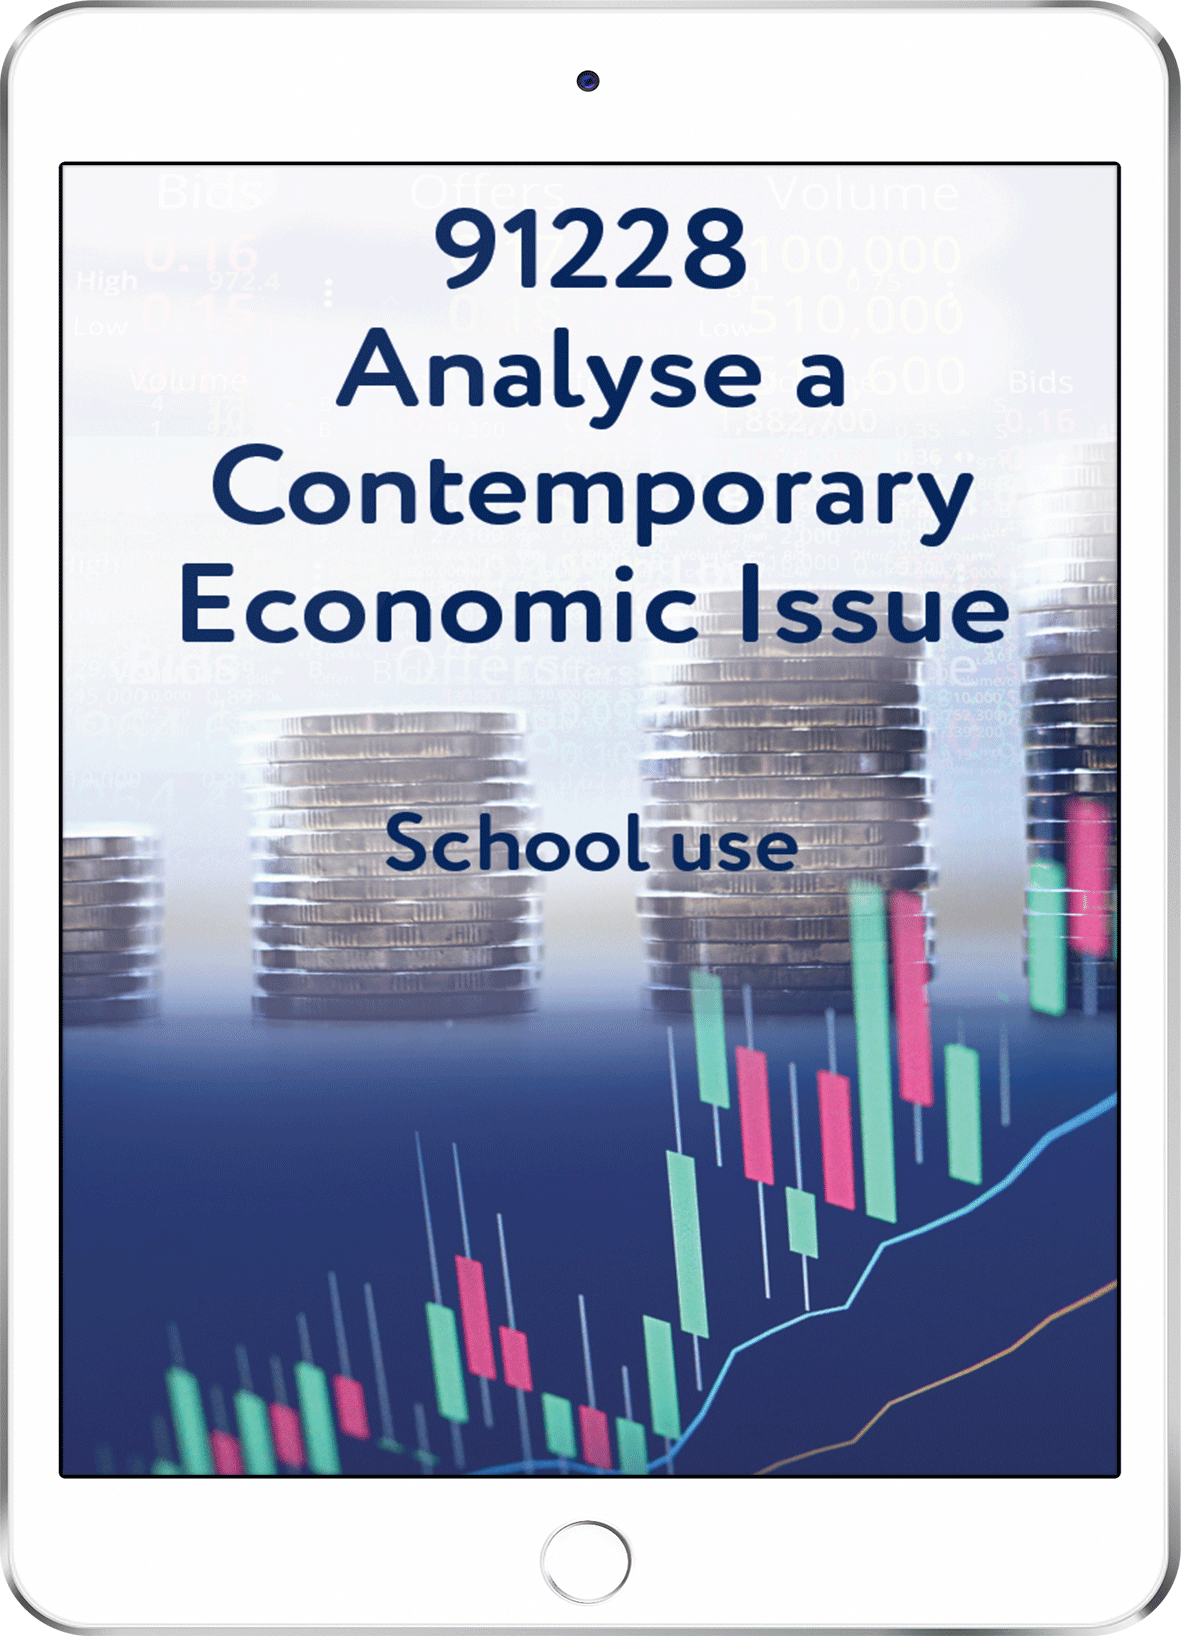 91228 Analyse a Contemporary Economic Issue - School Use